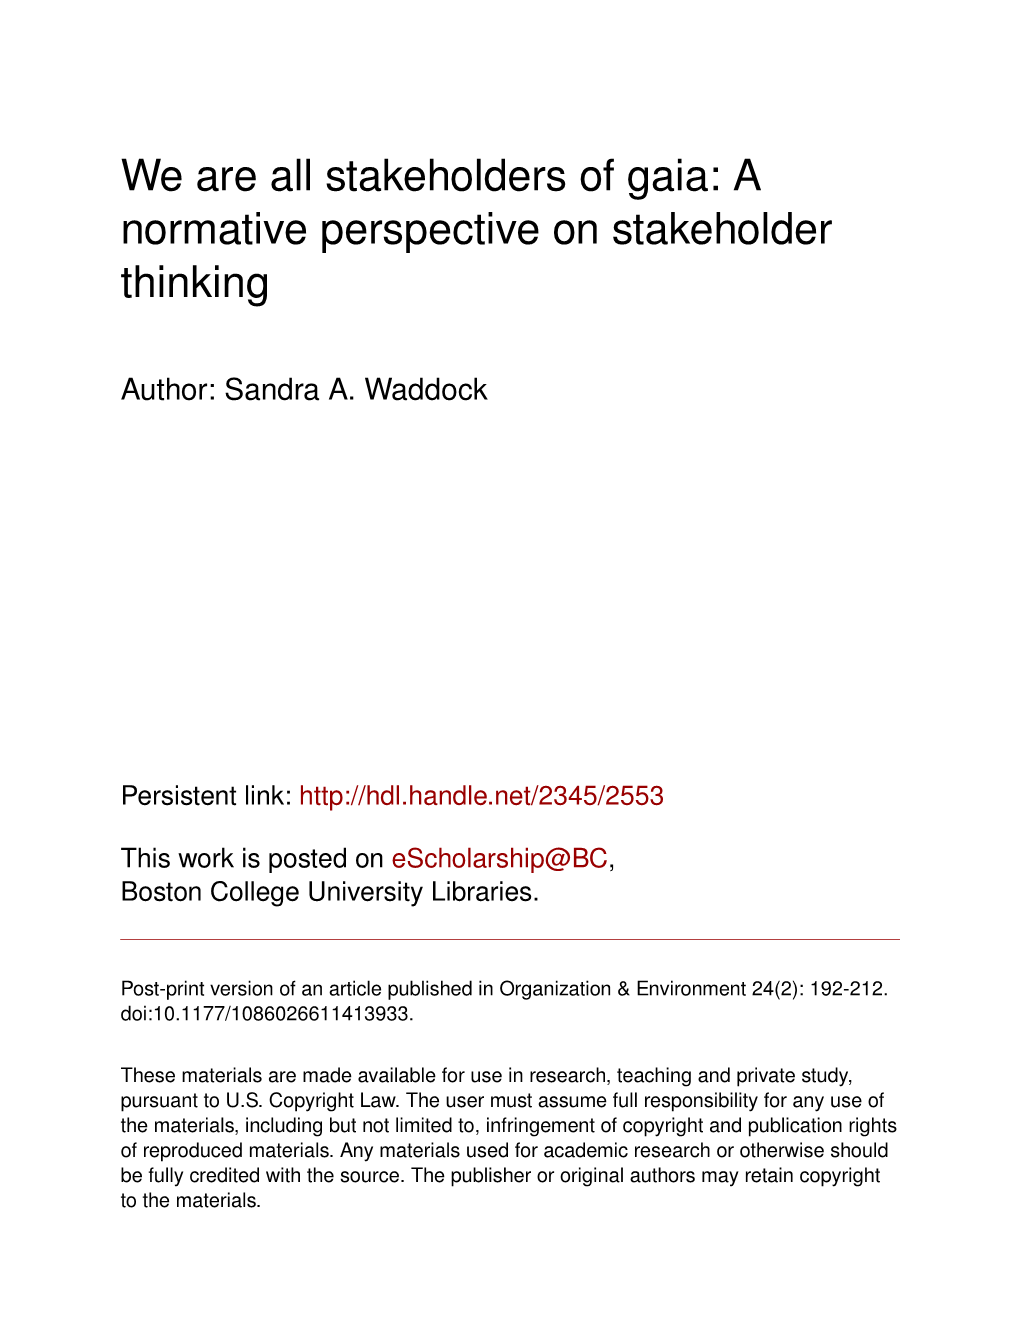 We Are All Stakeholders of Gaia: a Normative Perspective on Stakeholder Thinking